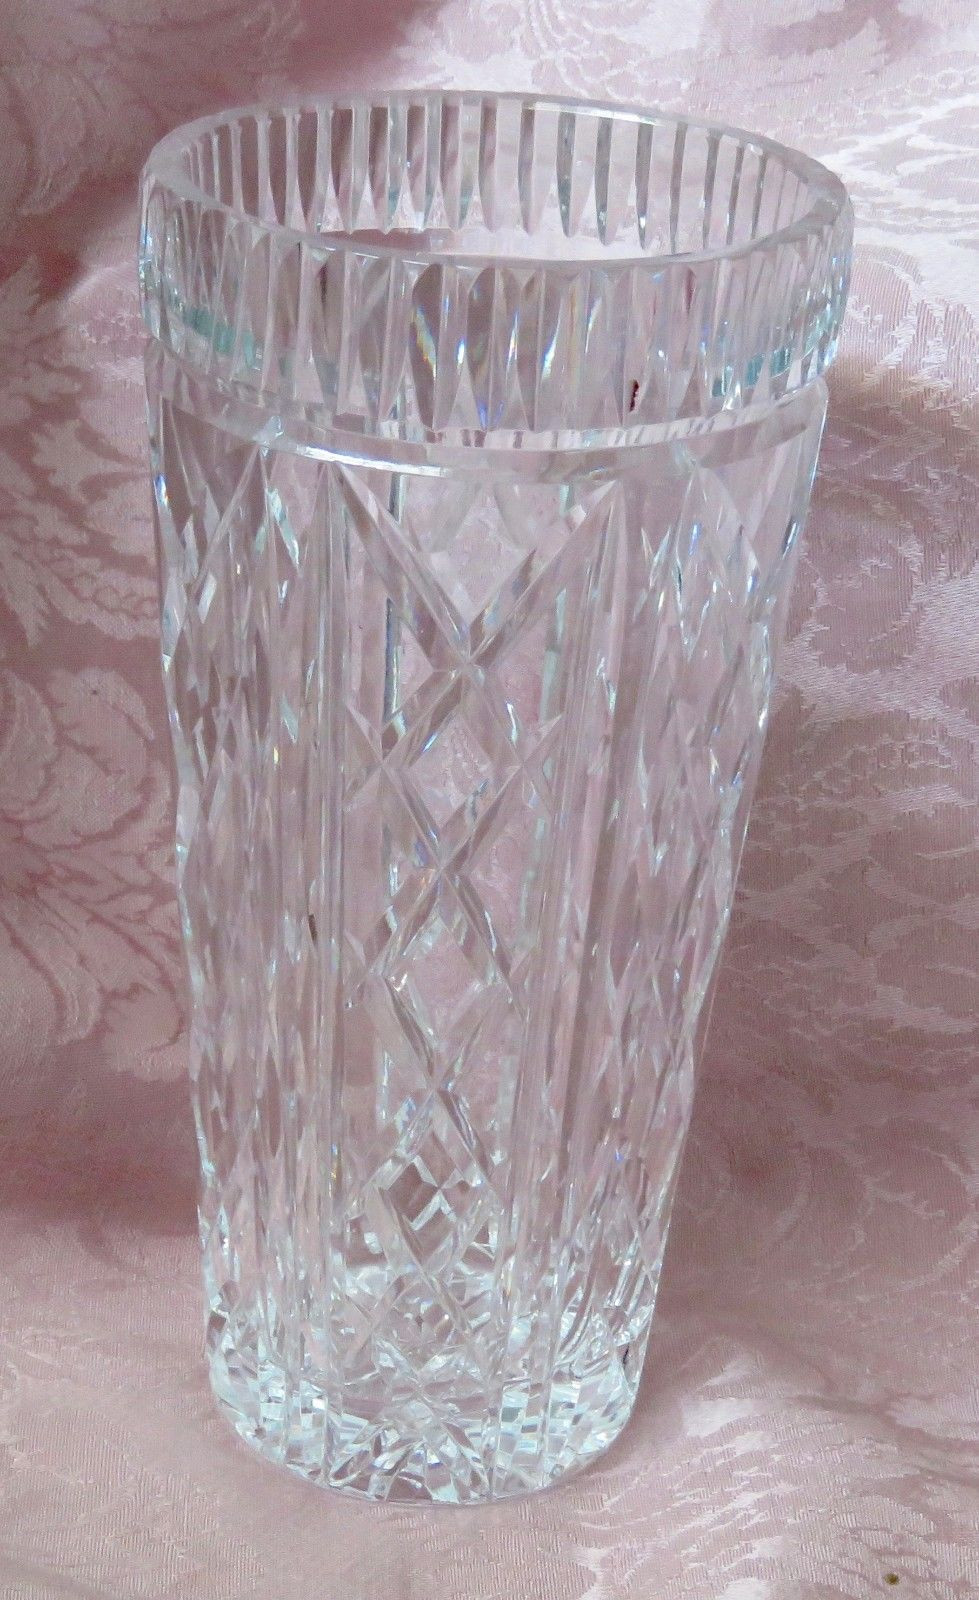 12 Perfect Waterford Crystal Balmoral Vase 2024 free download waterford crystal balmoral vase of waterford crystal flower vase killeen pattern 79 00 picclick inside waterford crystal flower vase killeen pattern 1 of 7only 1 available